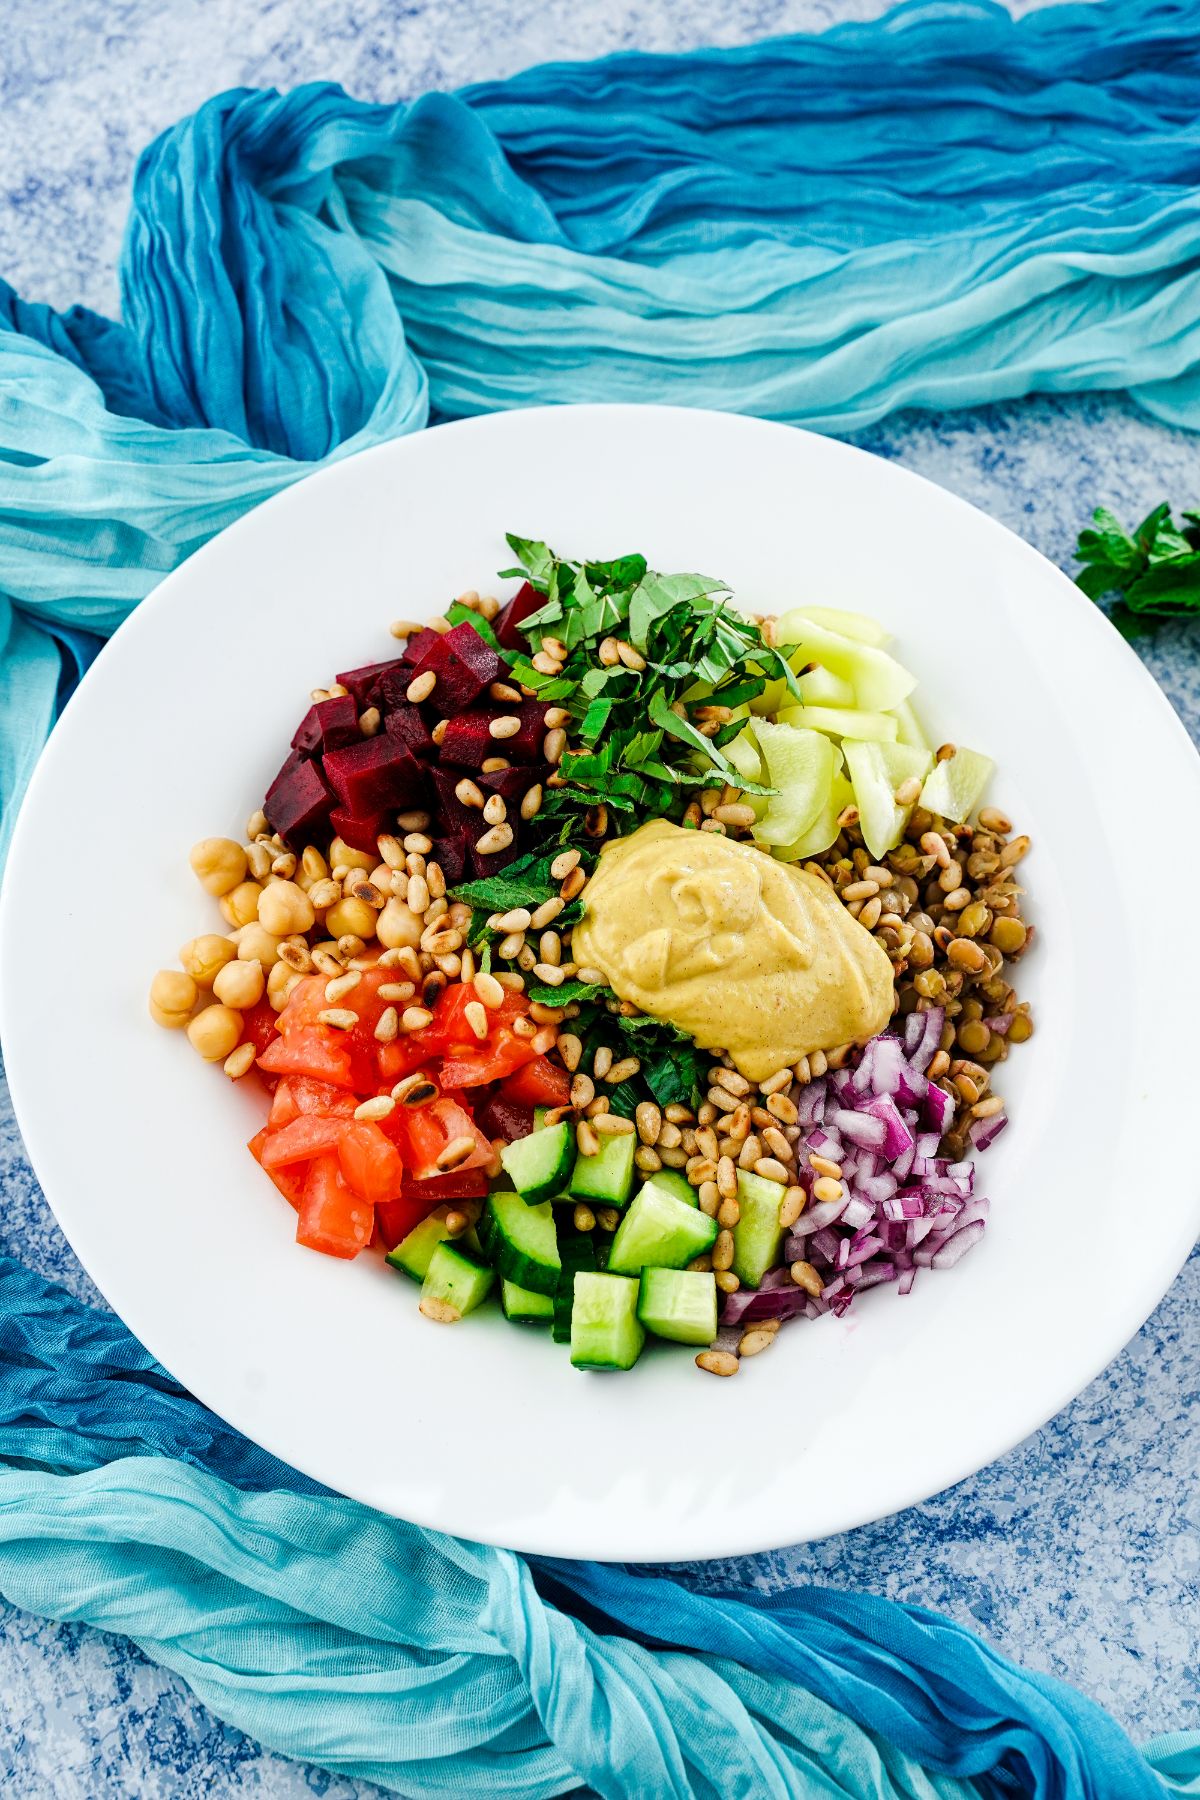 white bowl with colorful vegetables and lentils on top of teal cloth tablecloth